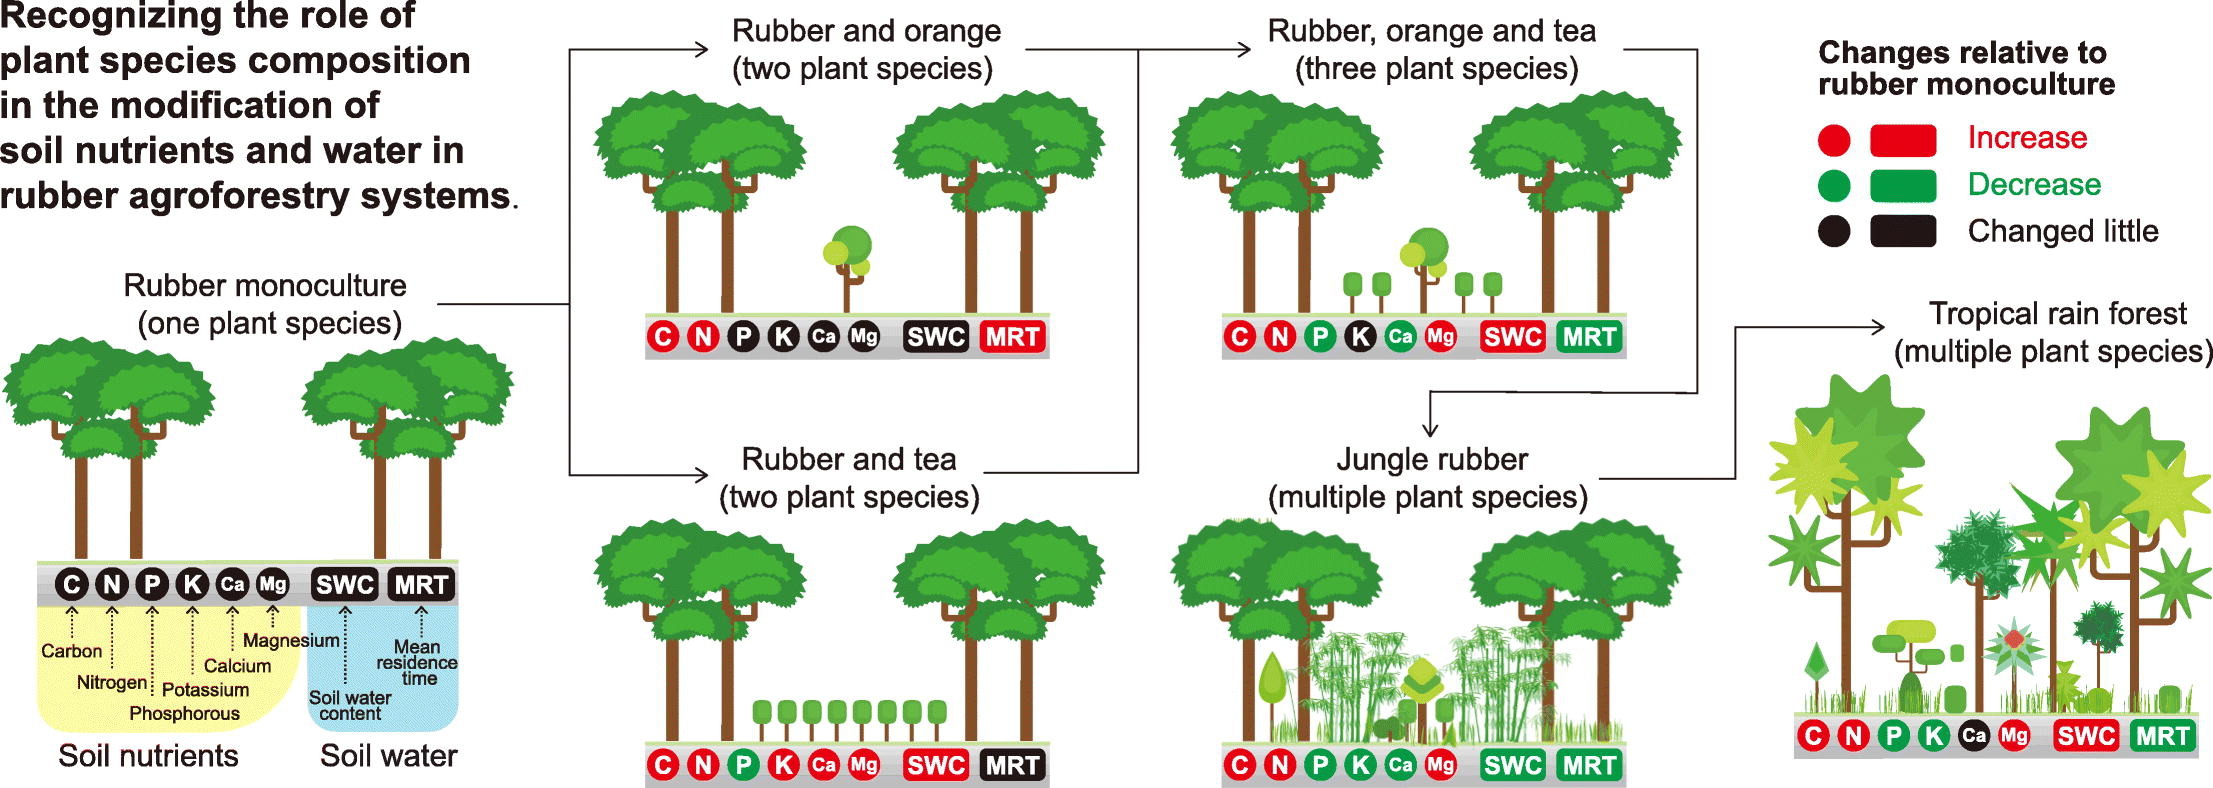 Recognizing the role of plant species composition on the modification of soil nutrients and water in rubber agroforestry systems